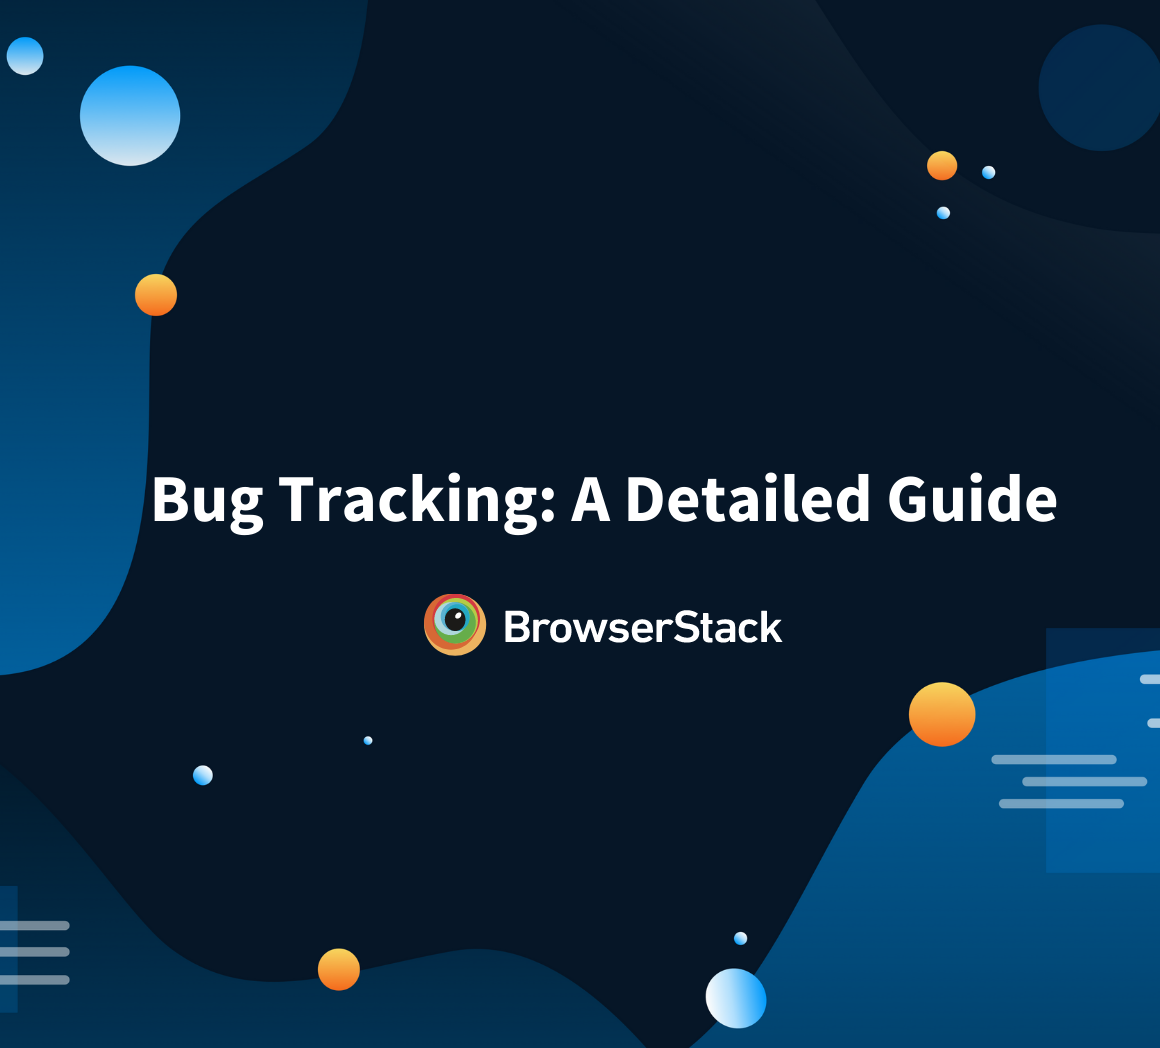 Detailed Guide on Bug Tracking